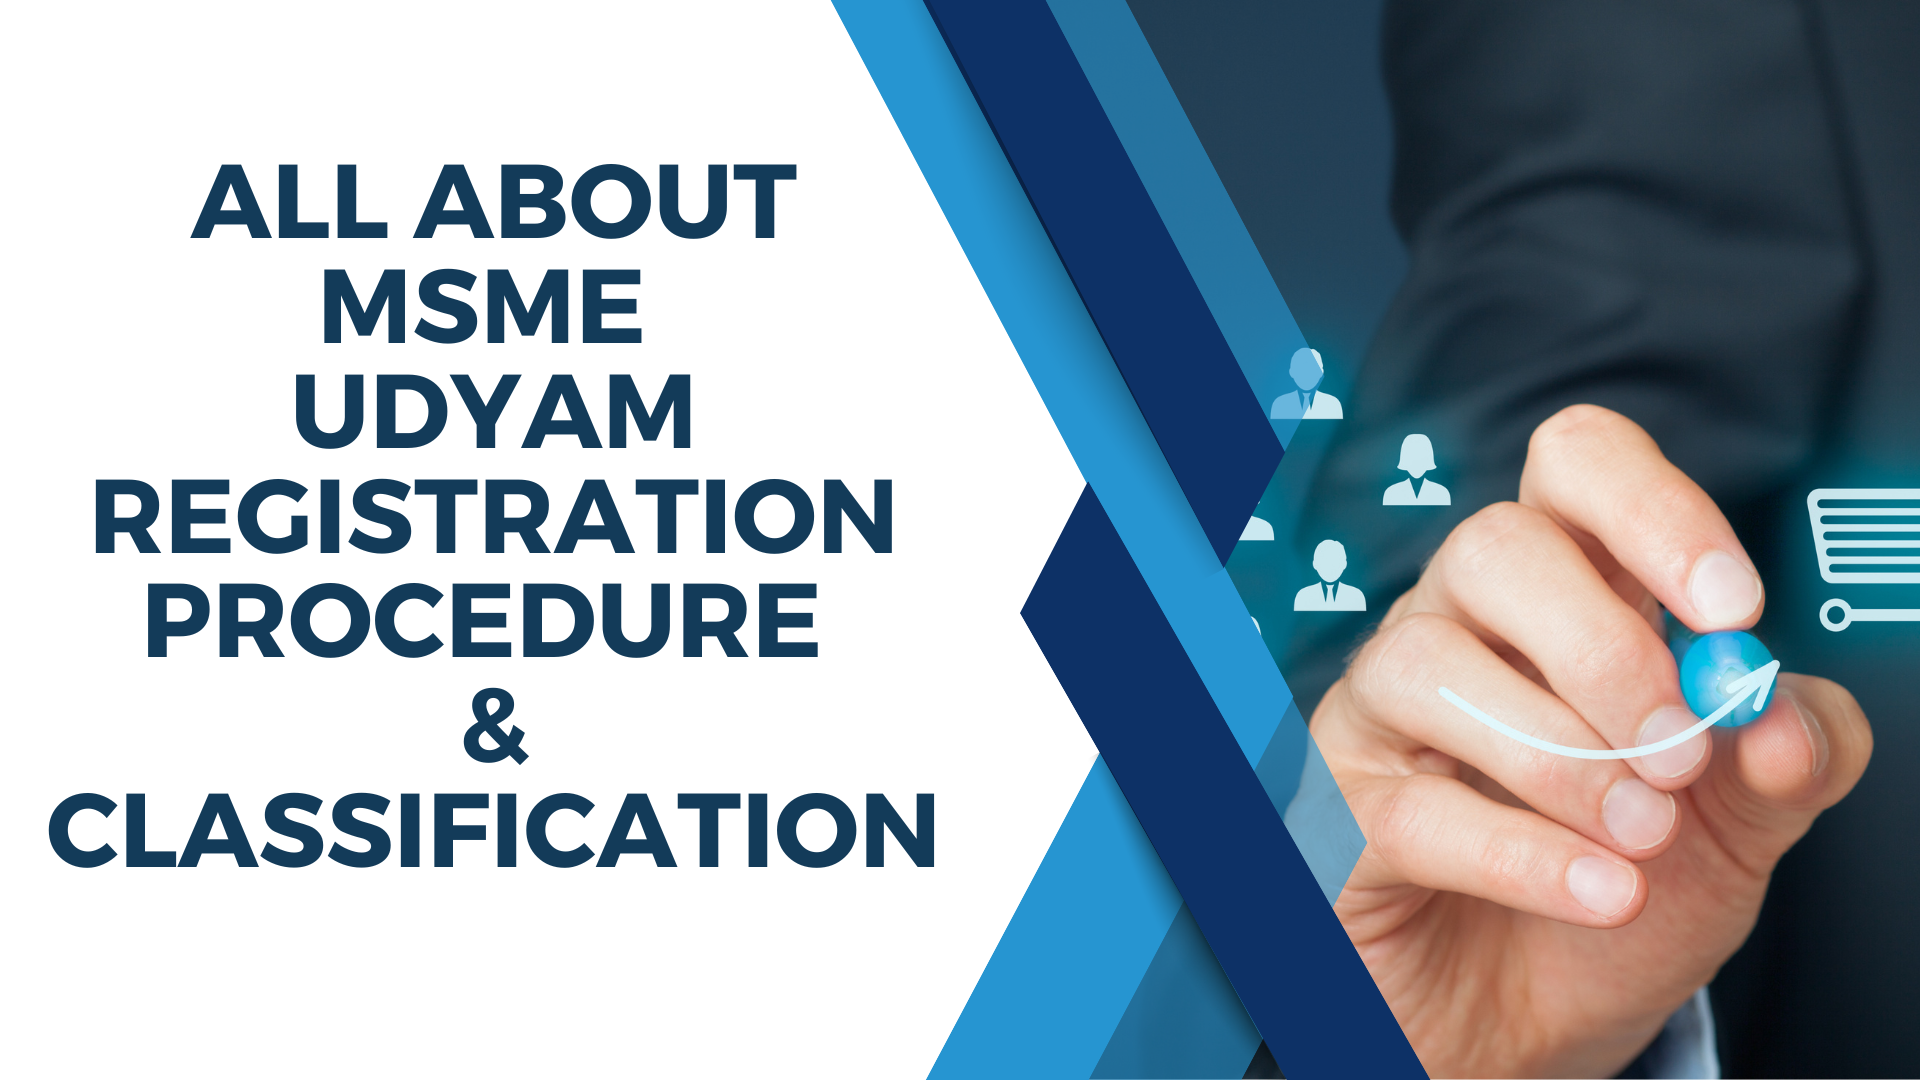 All About MSME Udyam Registration Procedure & Classification